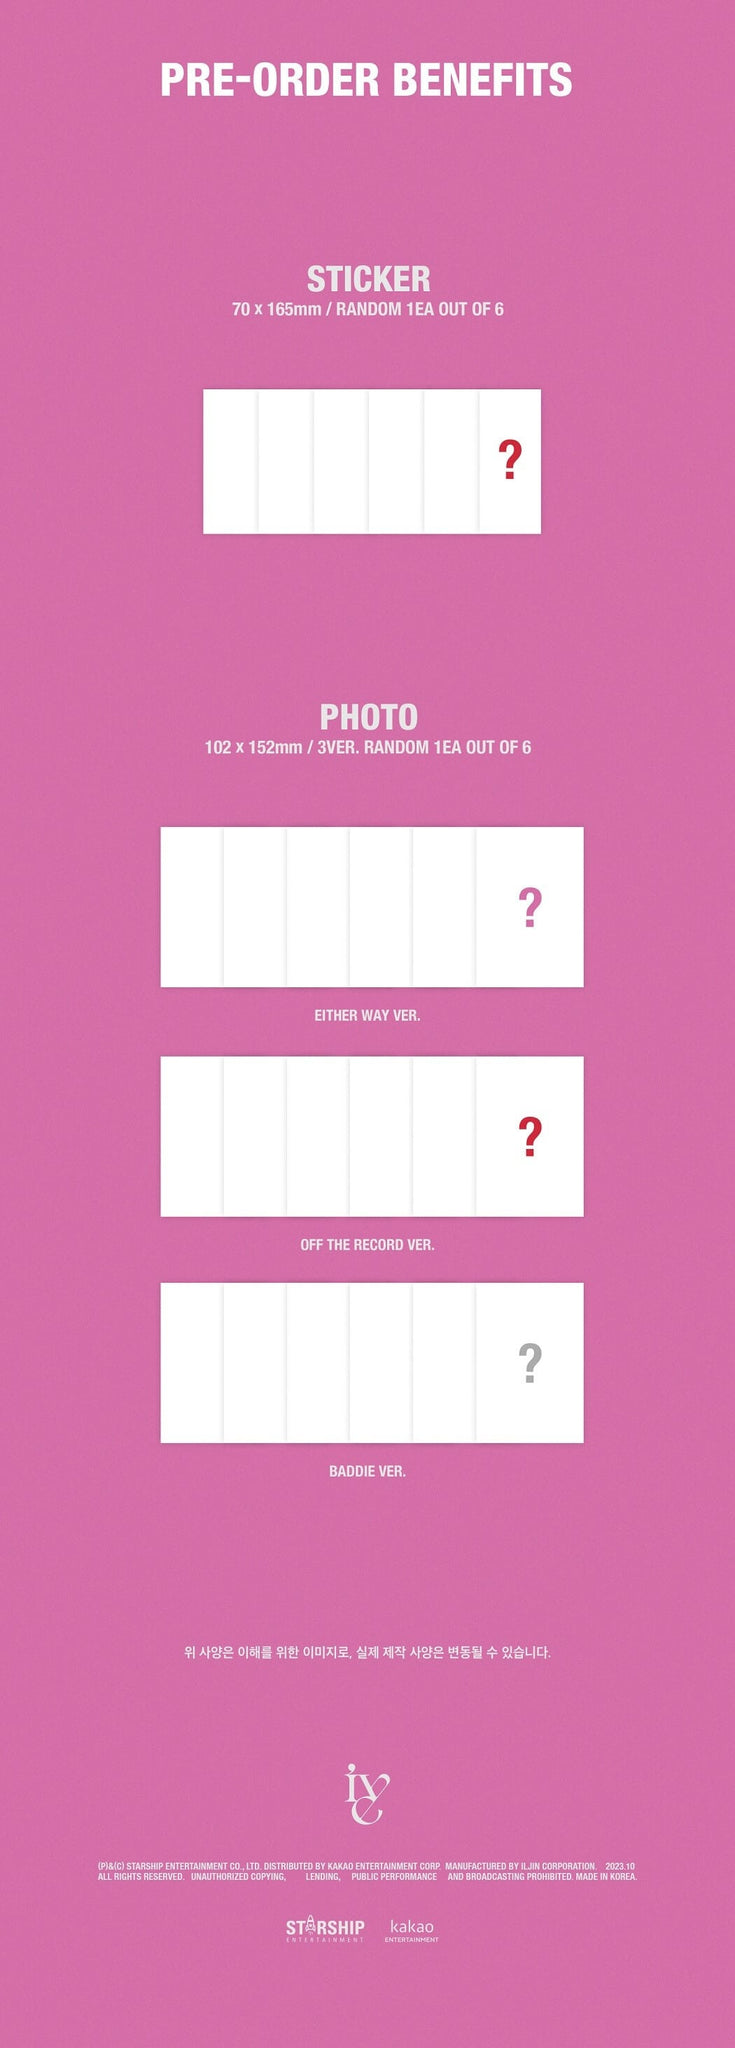 IVE 1st EP Album I'VE MINE Inclusions Pre-order Only Sticker Photo